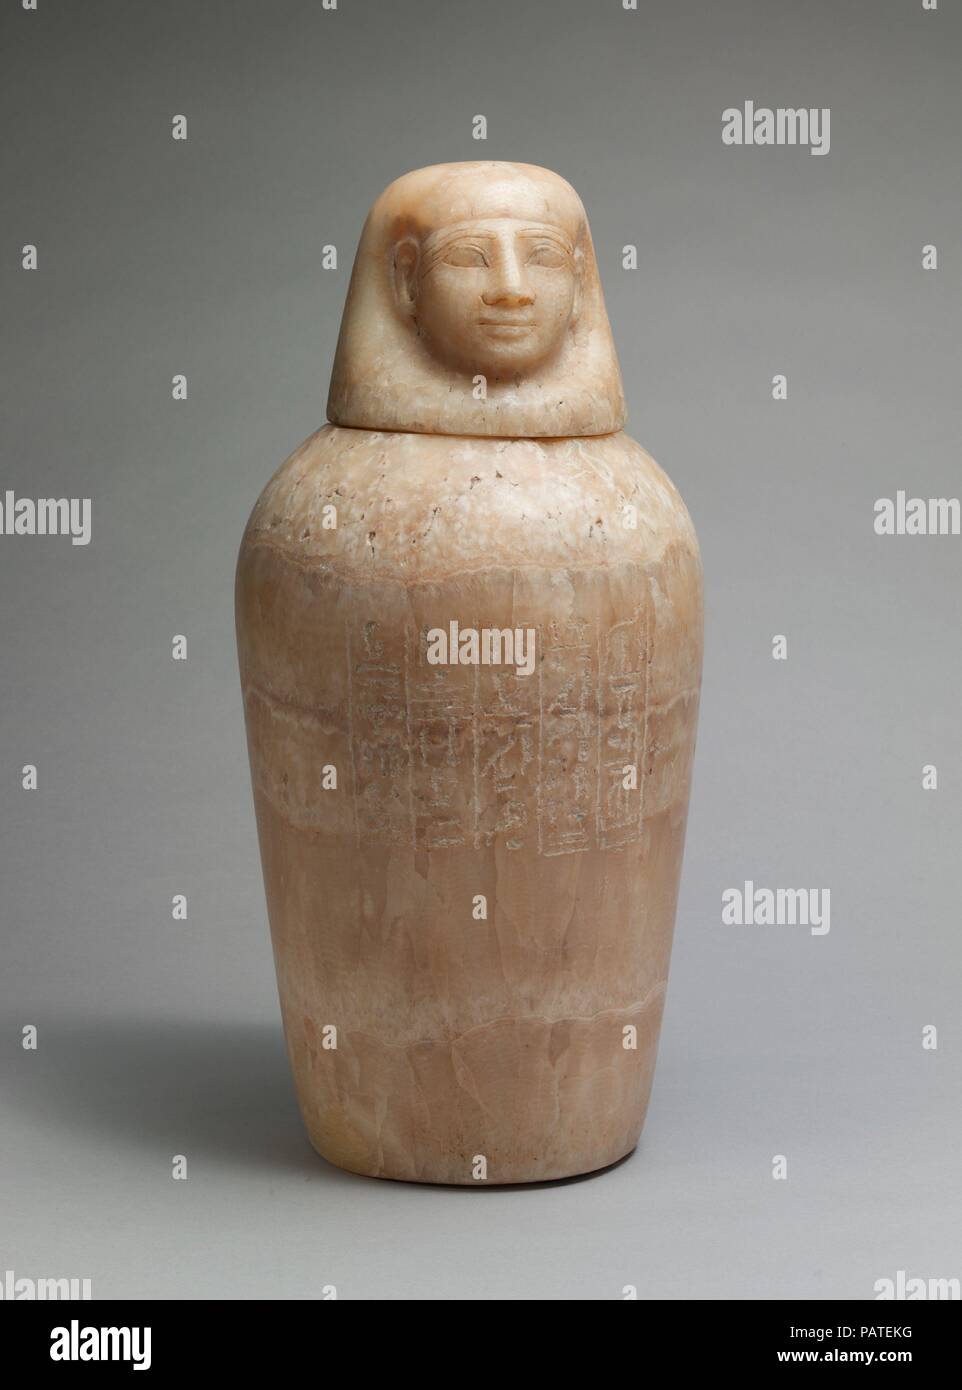 Canopic Jar of Minmose. Dimensions: H. 42 cm (16 9/16 in.). Dynasty: probably mid-Dynasty 18. Date: ca. 1450-1400 B.C..  The owner of this canopic jar was Minmose, a troop captain whose name and title appear in the left hand column of the inscription. The rest of the text invokes the goddess Nephthys and the god Imsety, asking their protection for the contents of the jar. Nephthys was one of the four goddesses who protected the dead, and Imsety was one of the 'four sons of Horus' who protected the four internal organs that were removed from the body during mummification.  Imsety was usually li Stock Photo